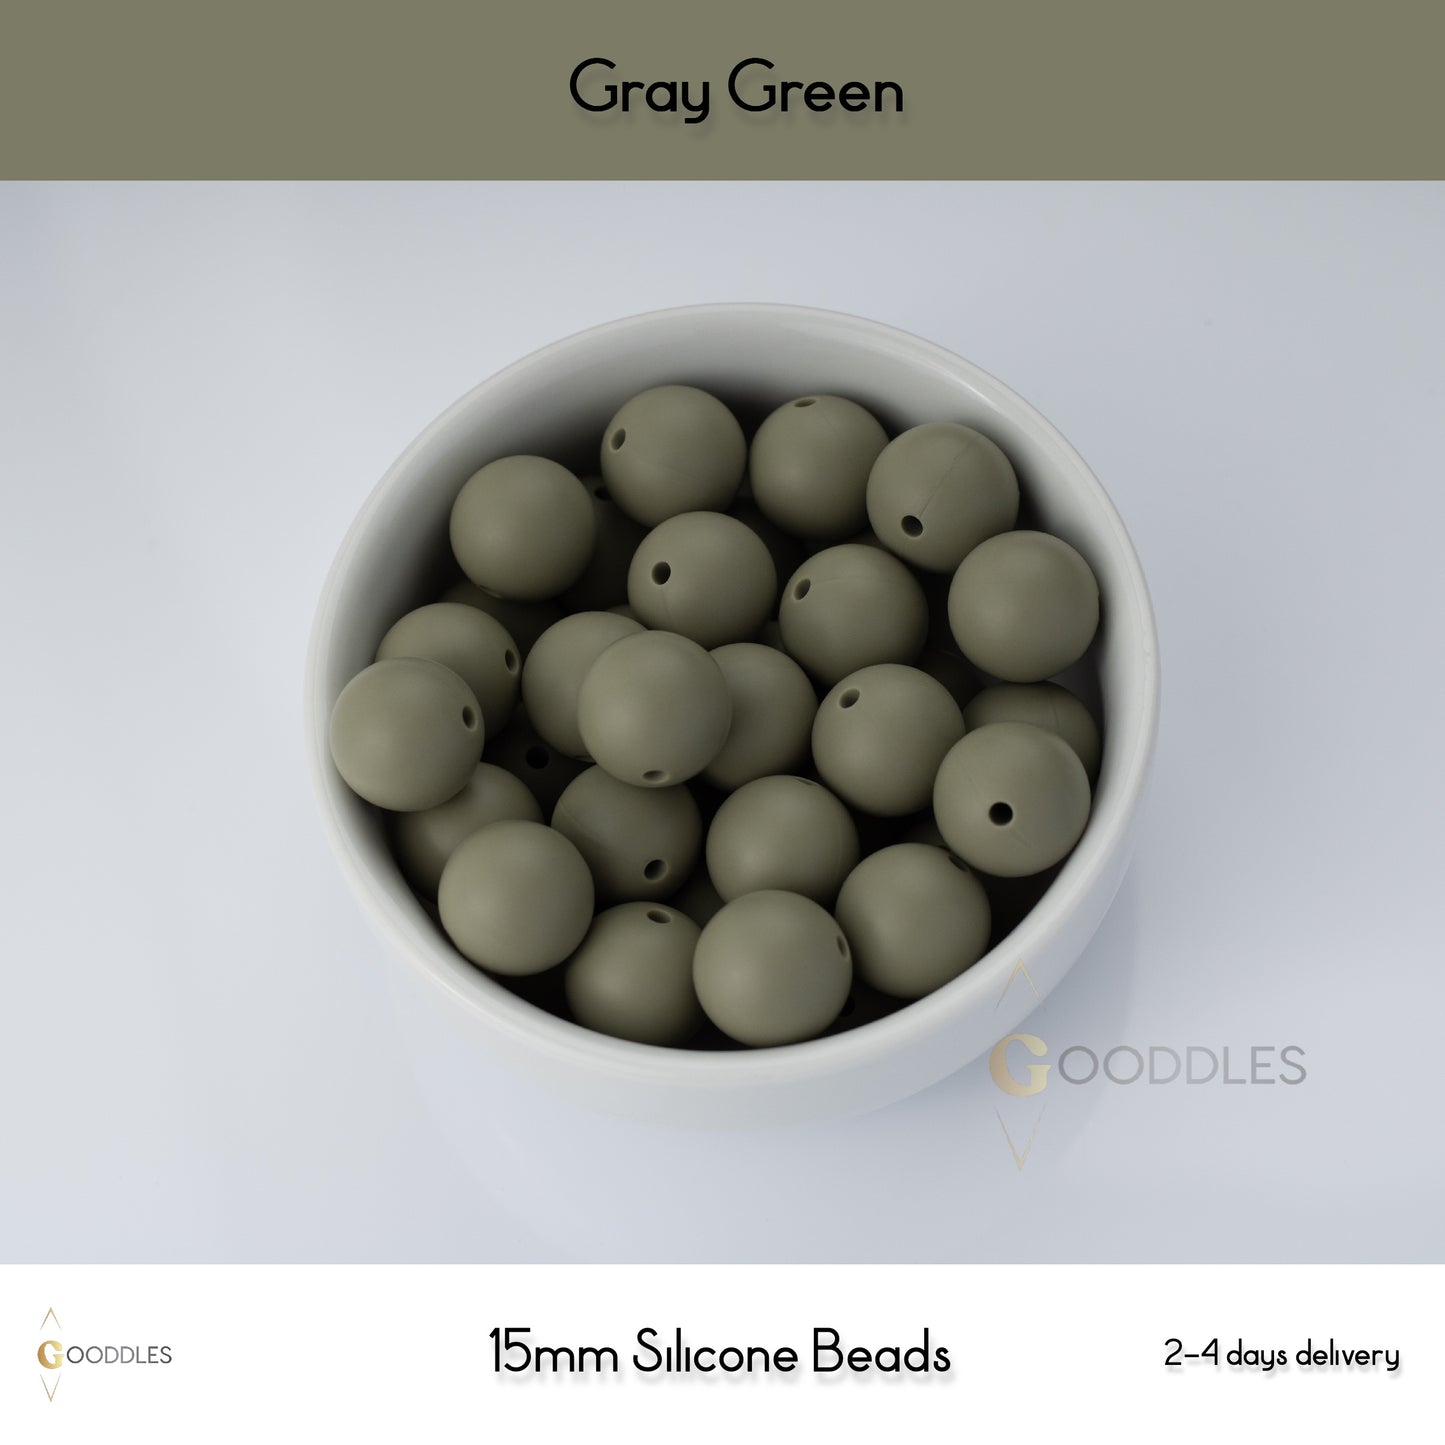 5pcs, Gray Green Silicone Beads Round Silicone Beads